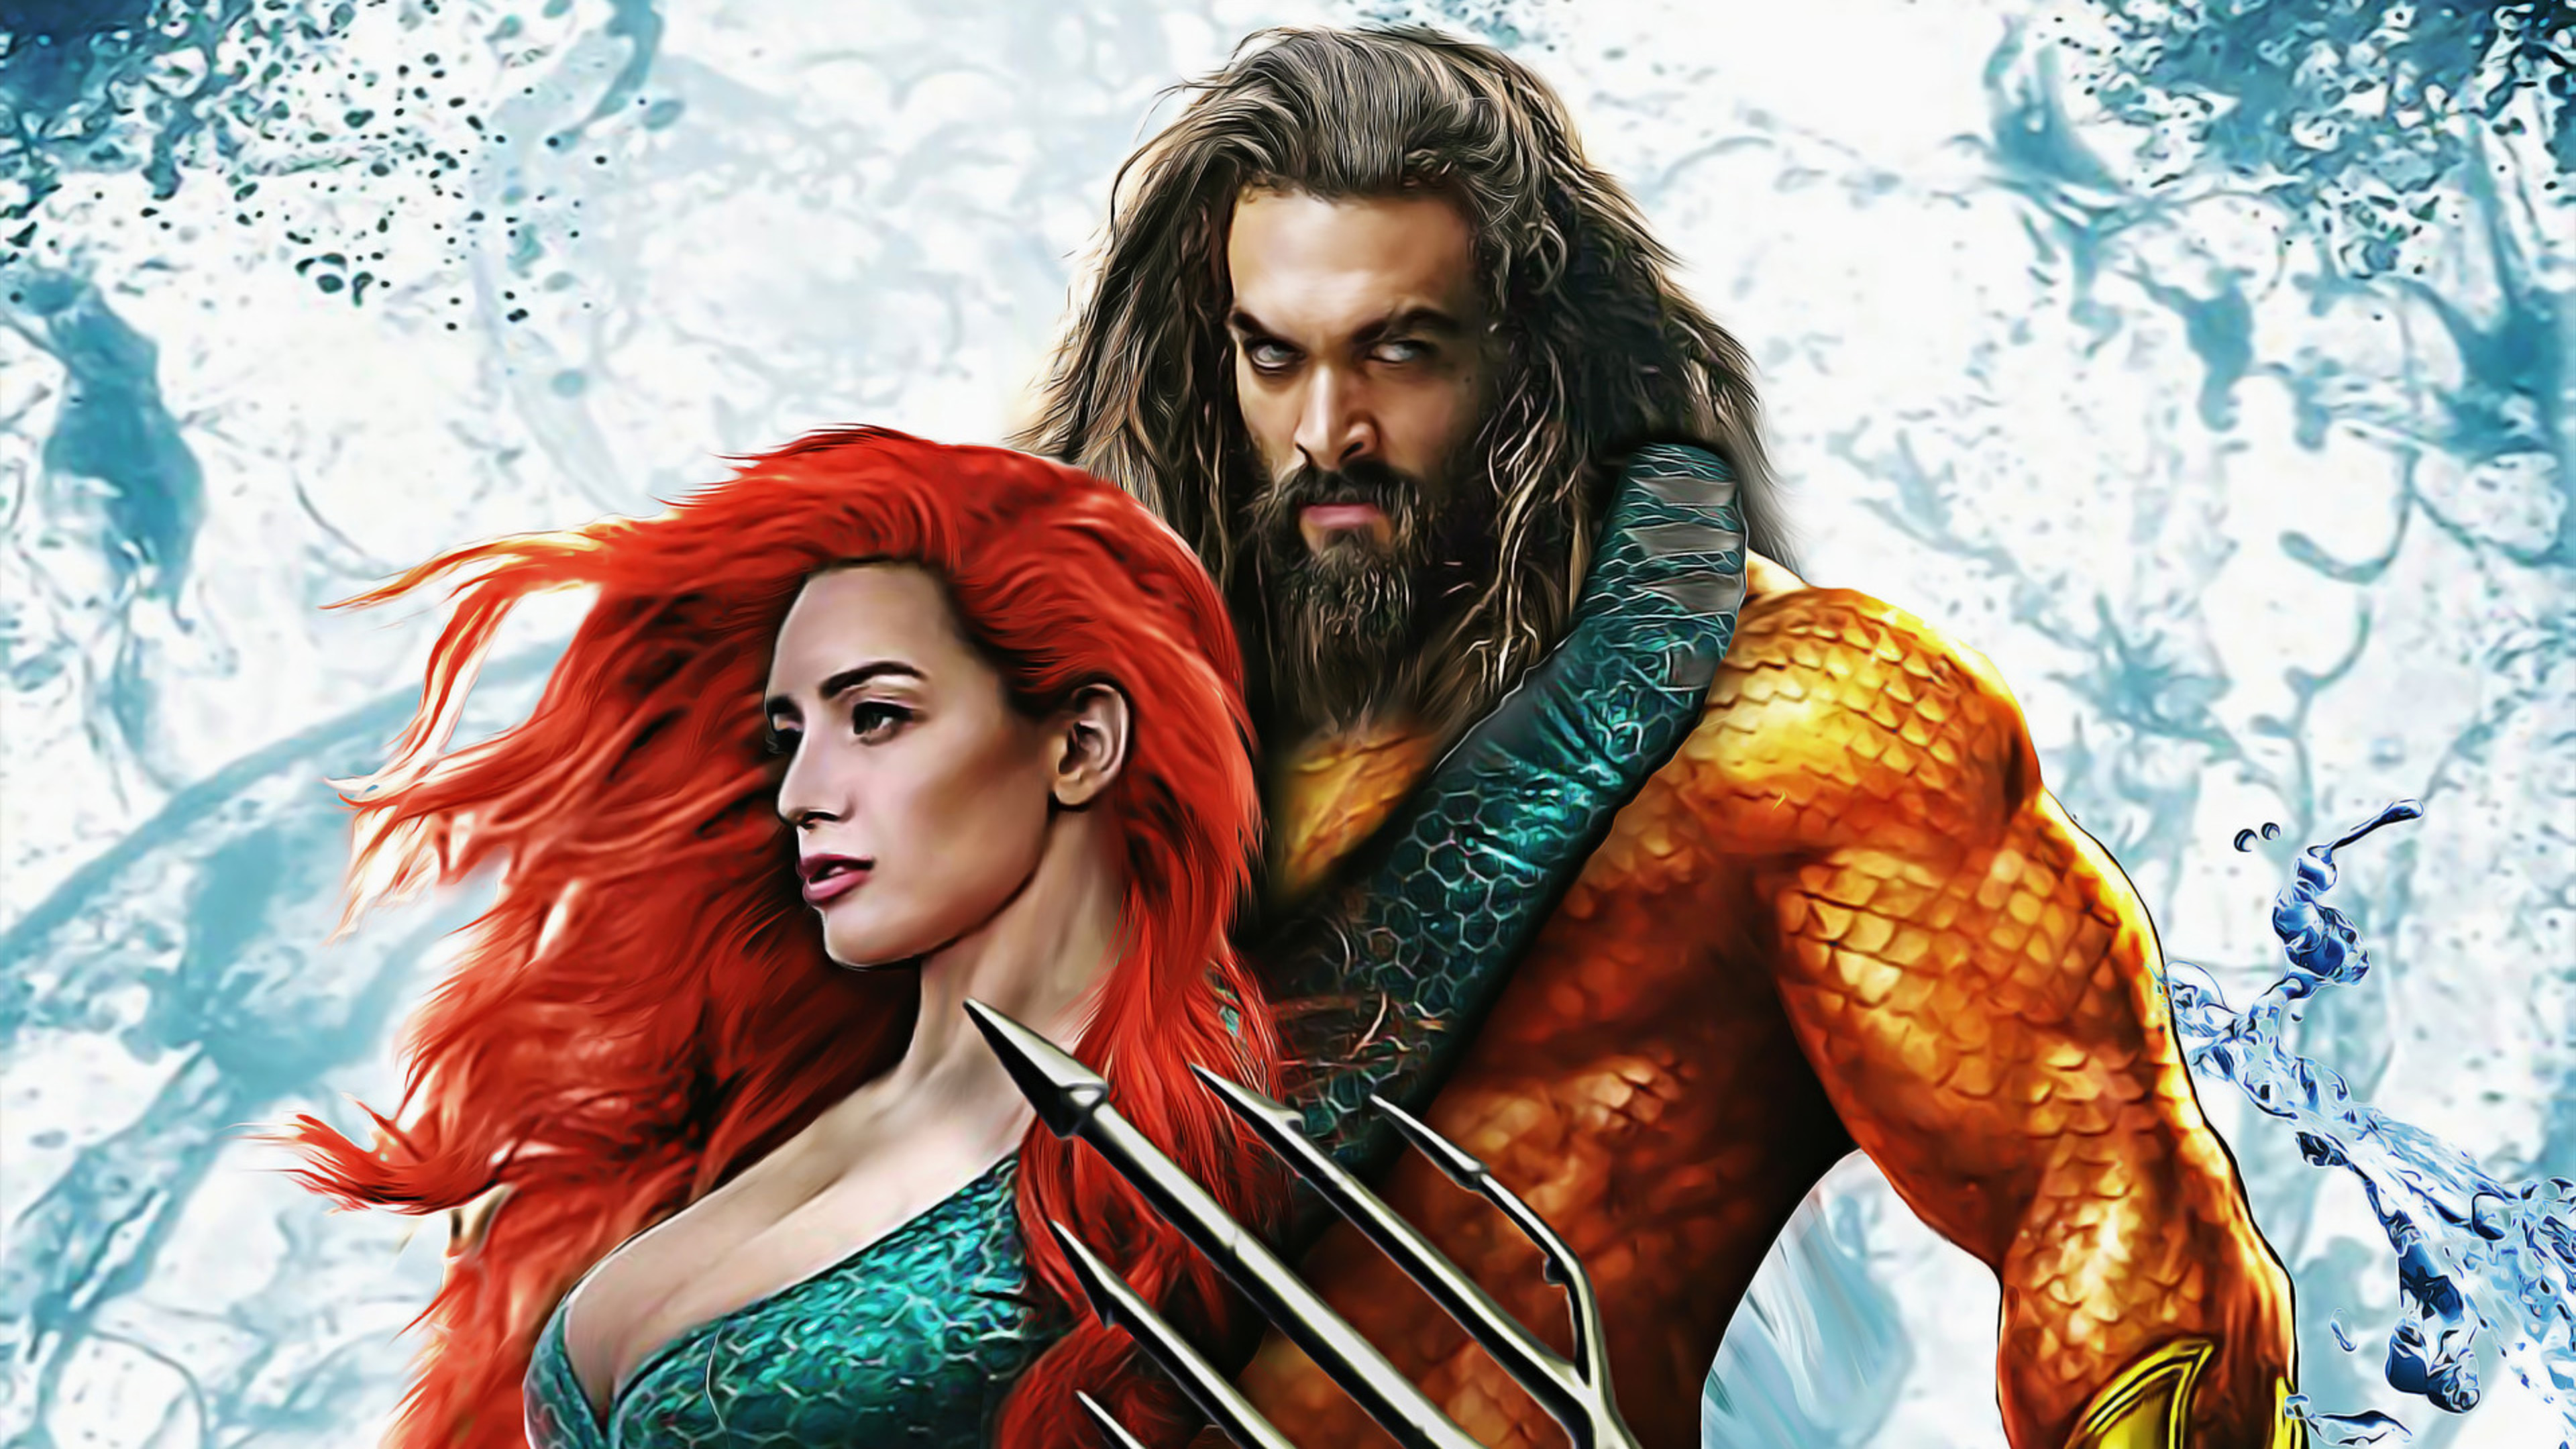 Aquaman 2 Release Date, Trailer, Cast, Plot Spoilers and Connection with other DC Movies